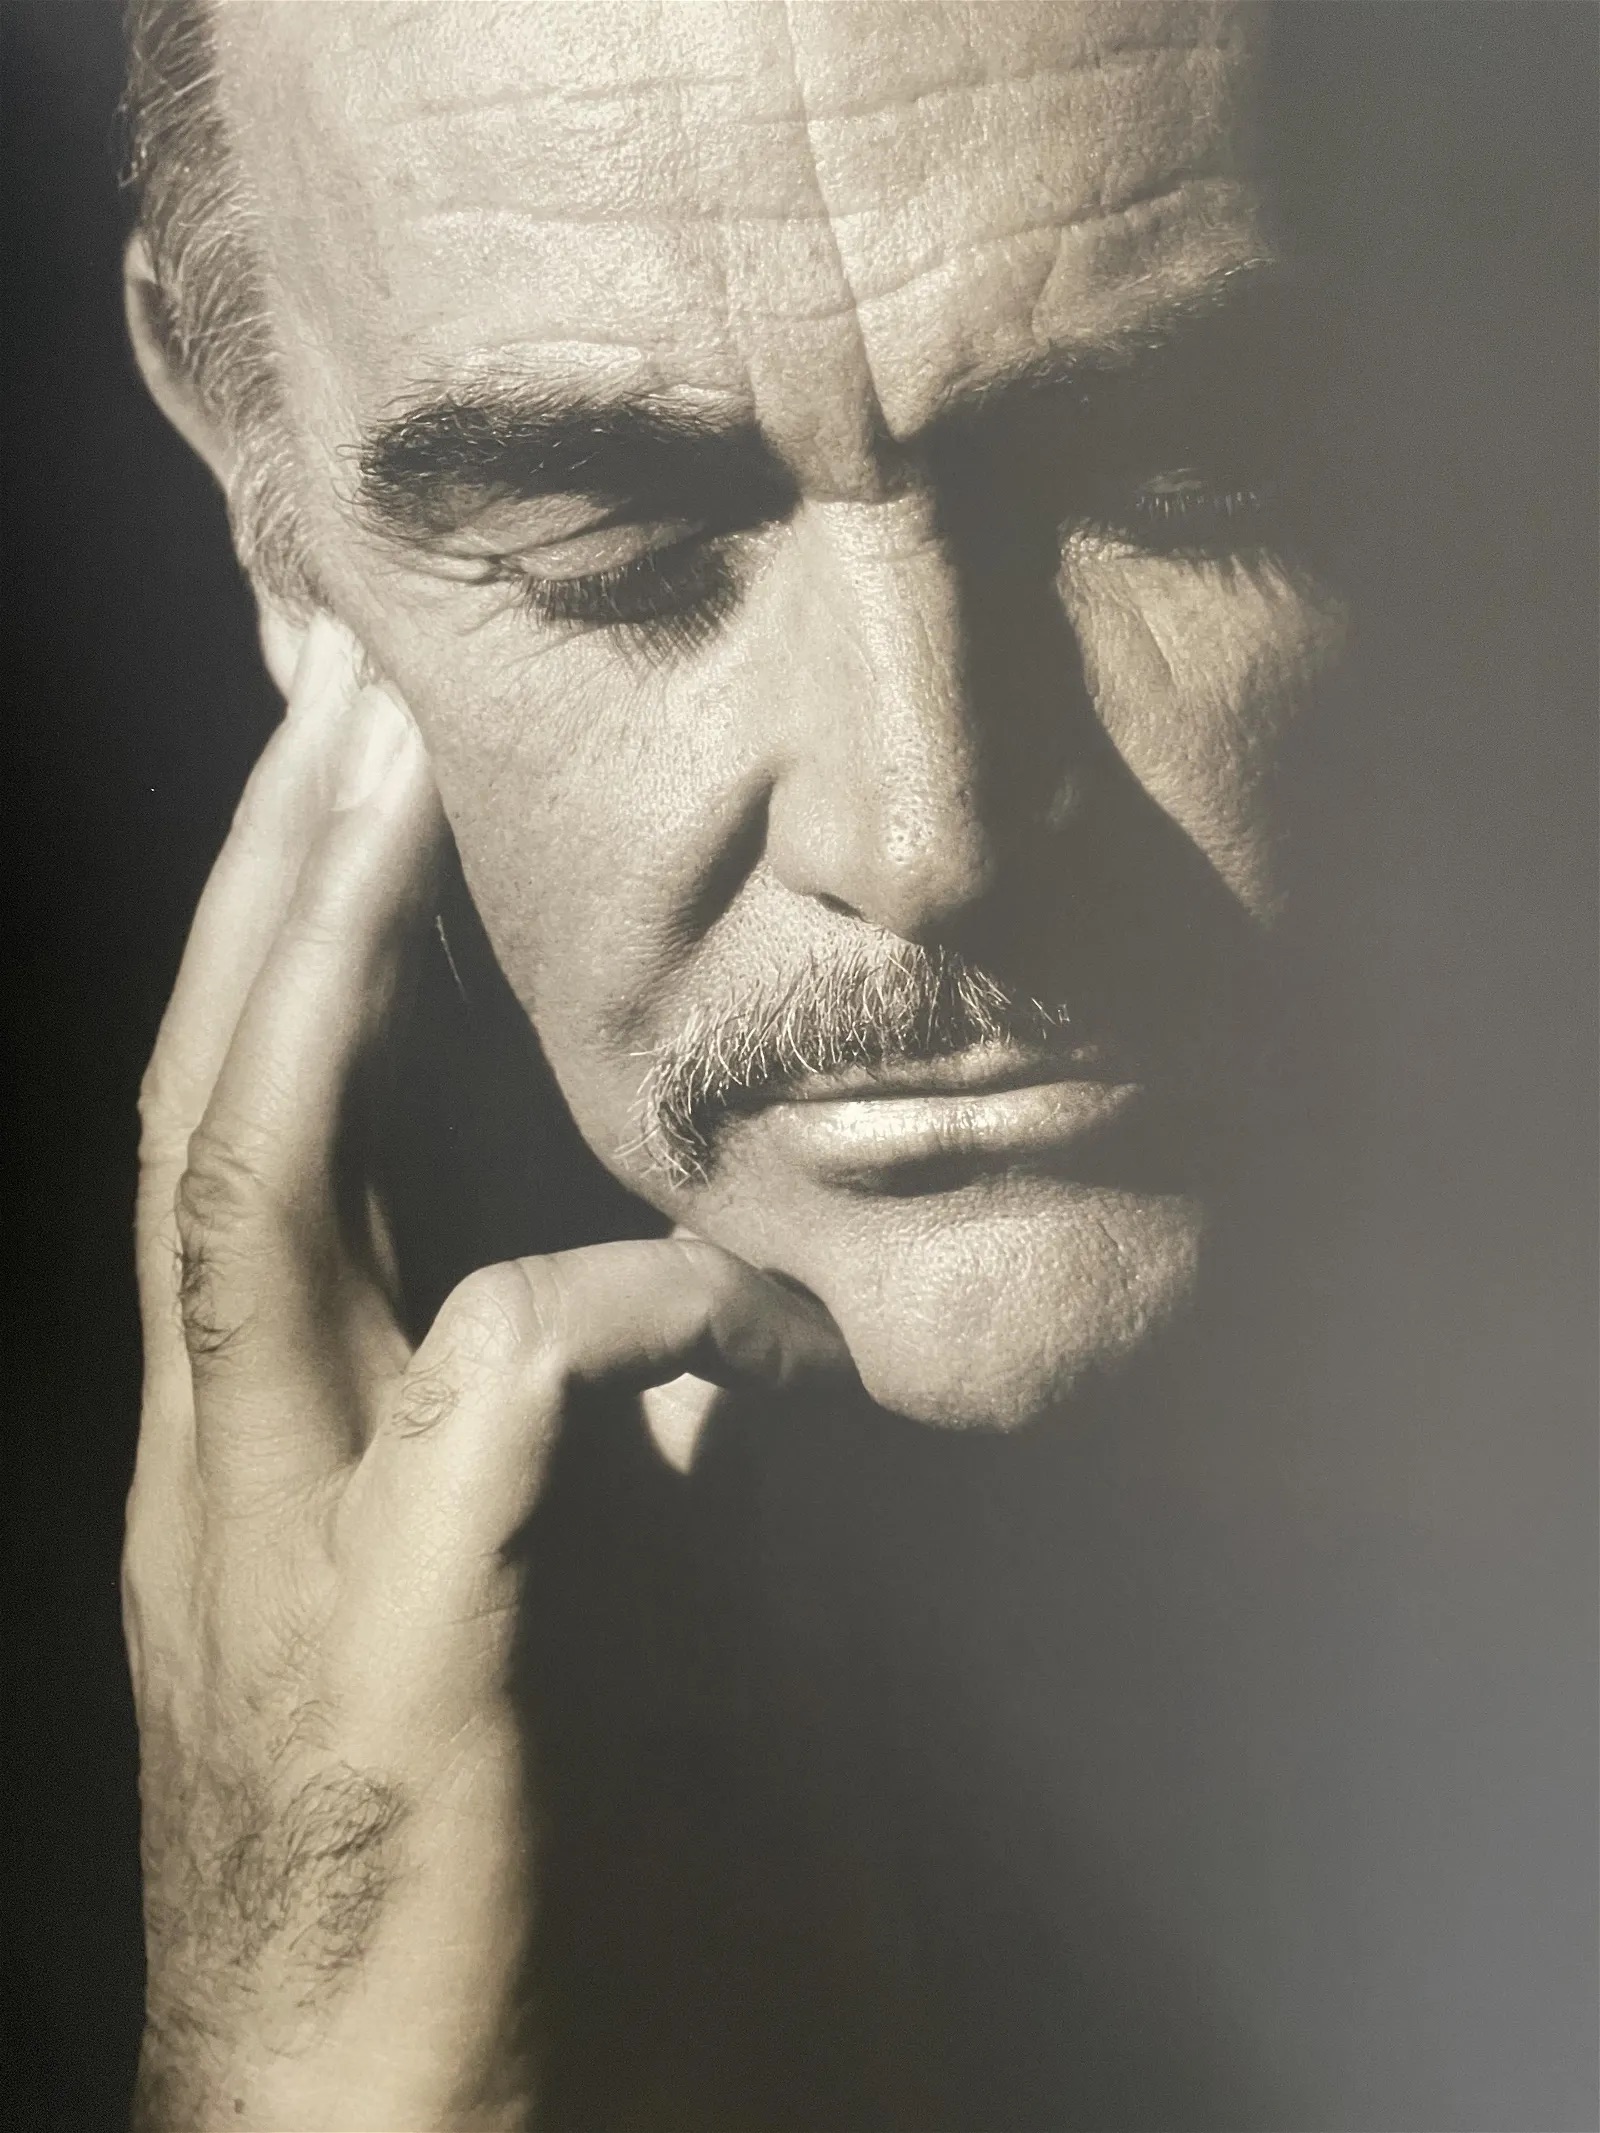 Herb Ritts "Sean Connery, Hollywood, 1989" Print - Image 3 of 6